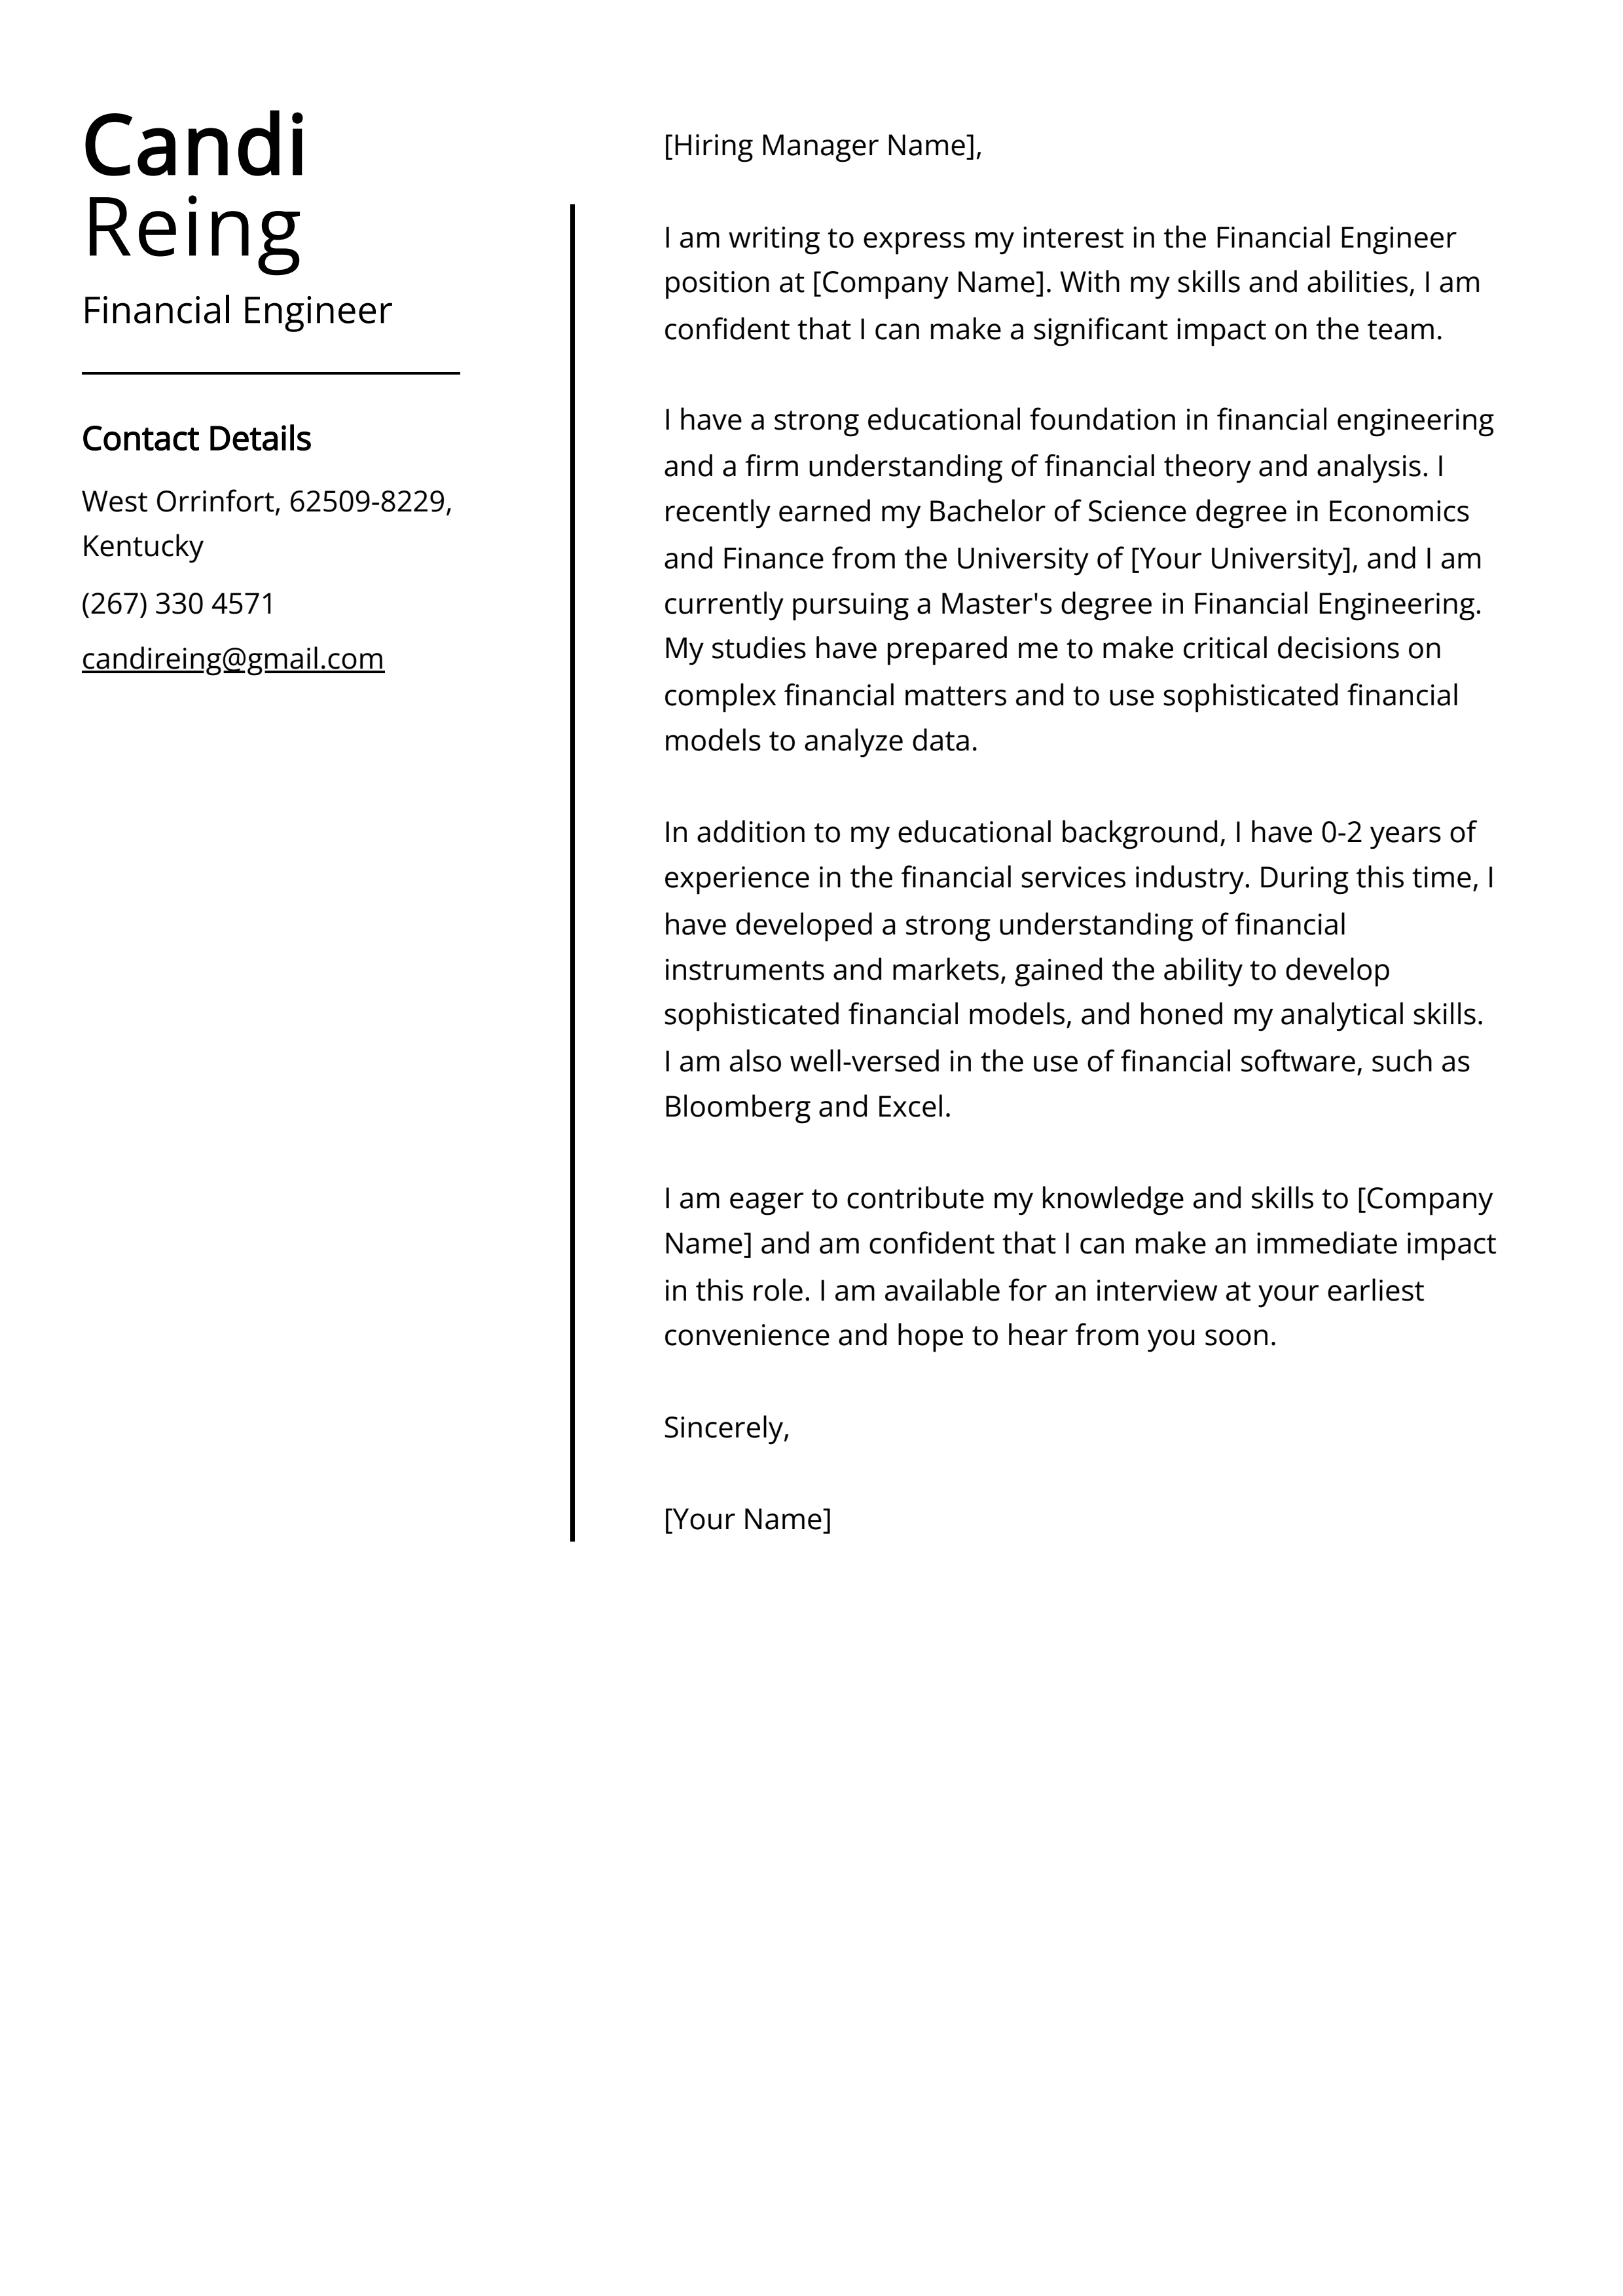 Financial Engineer Cover Letter Example